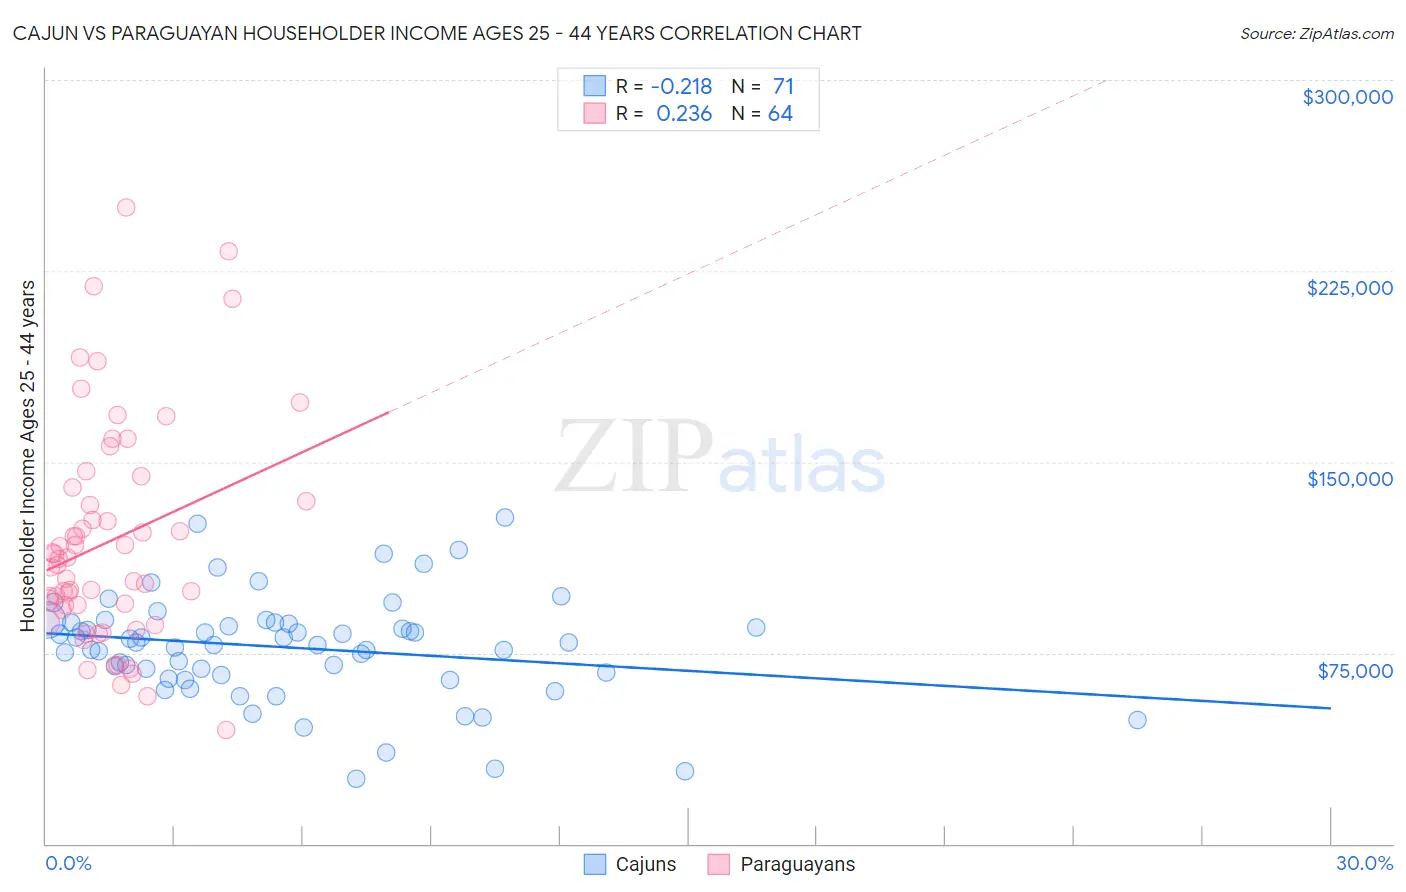 Cajun vs Paraguayan Householder Income Ages 25 - 44 years